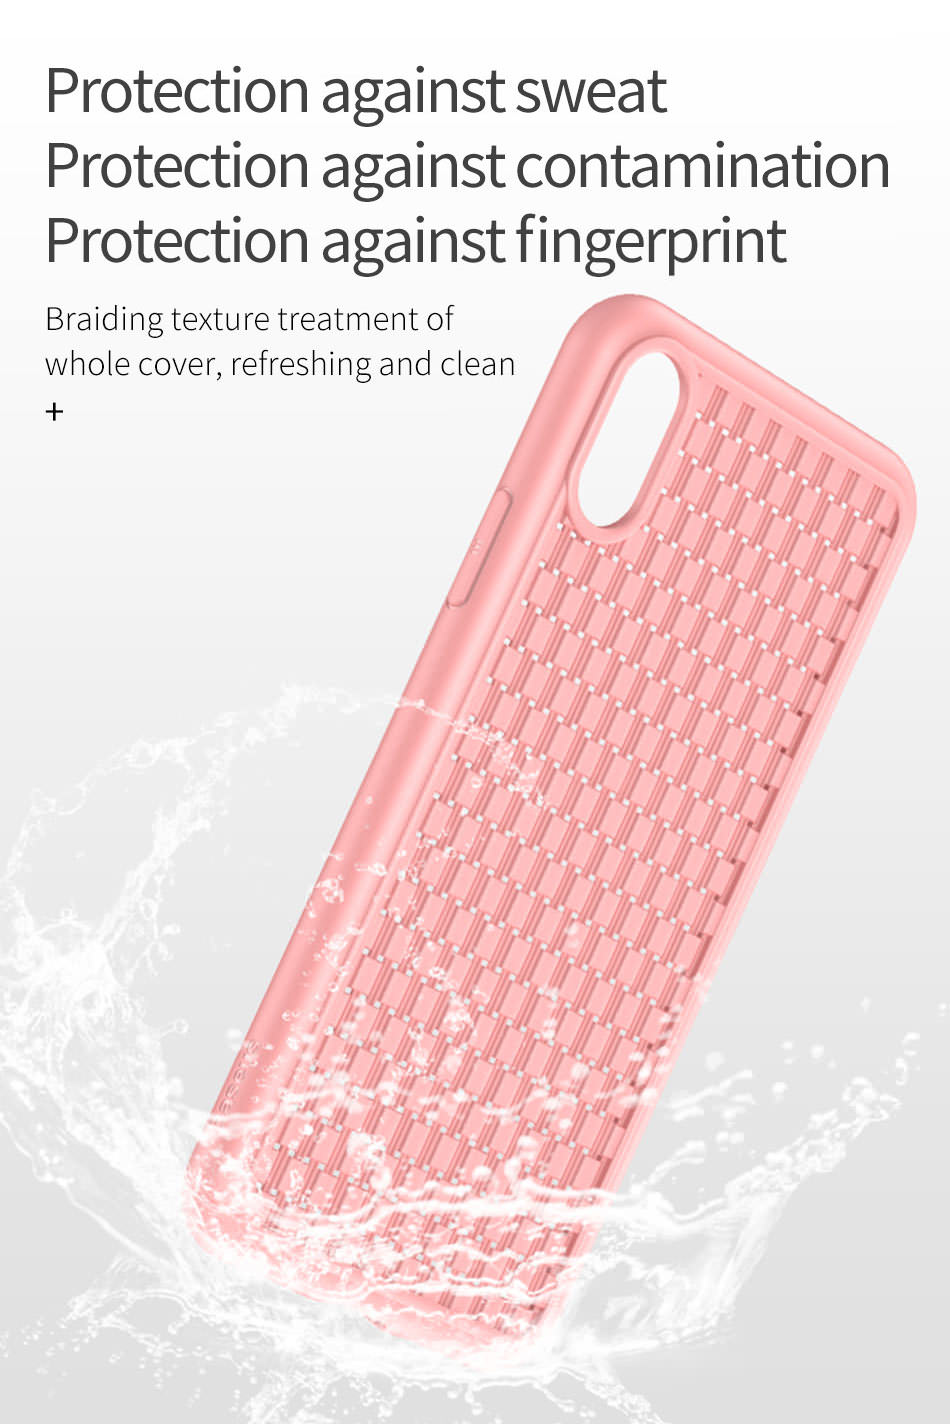 new iphone xr case